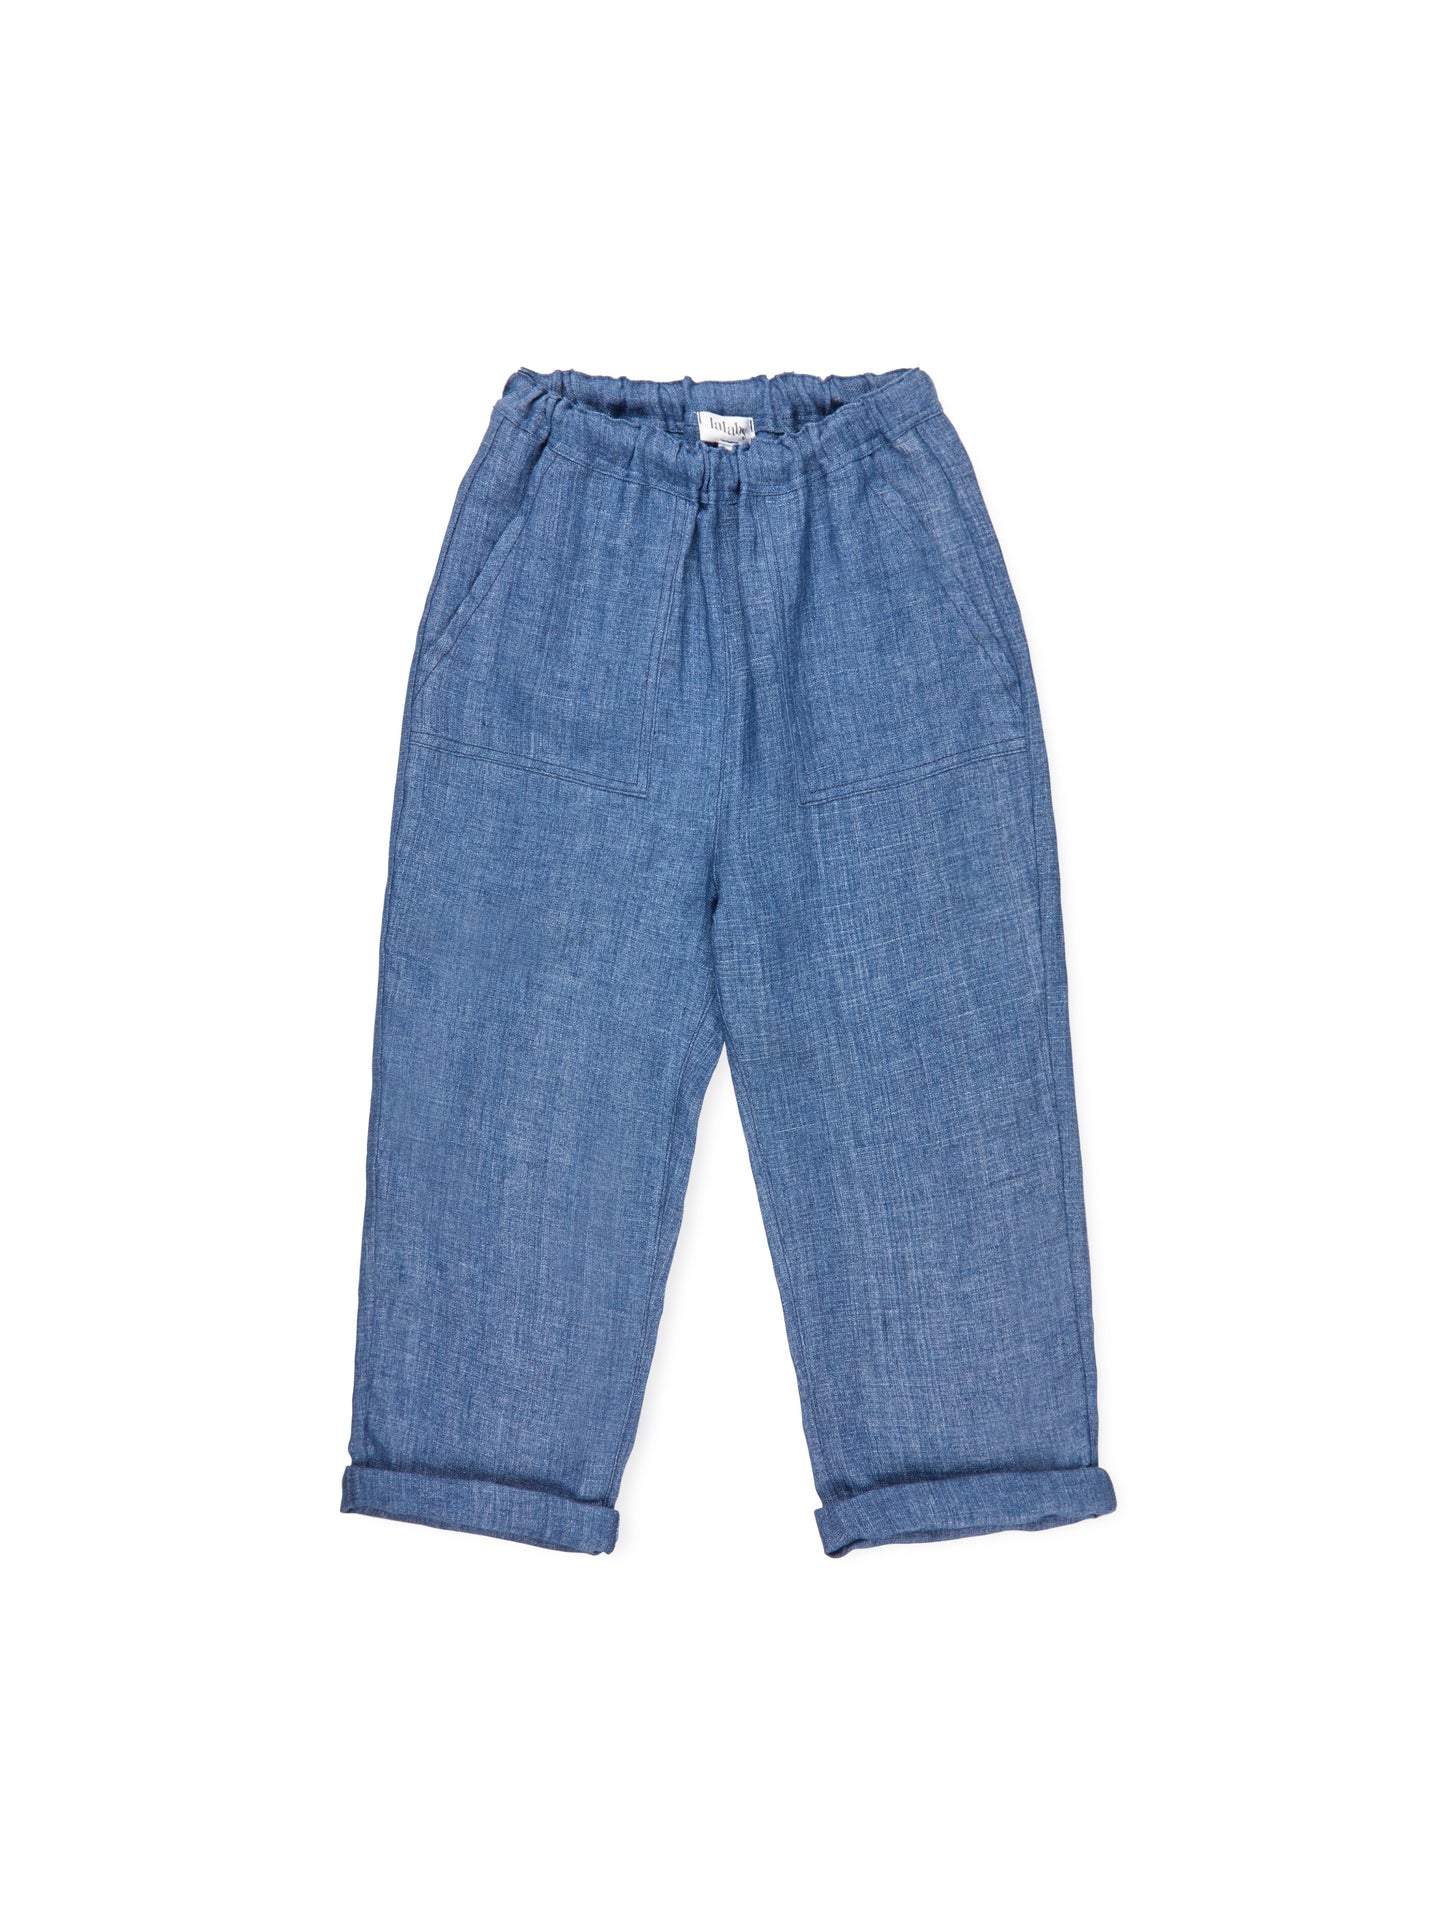 Lalaby - Axel trousers - Denim blue